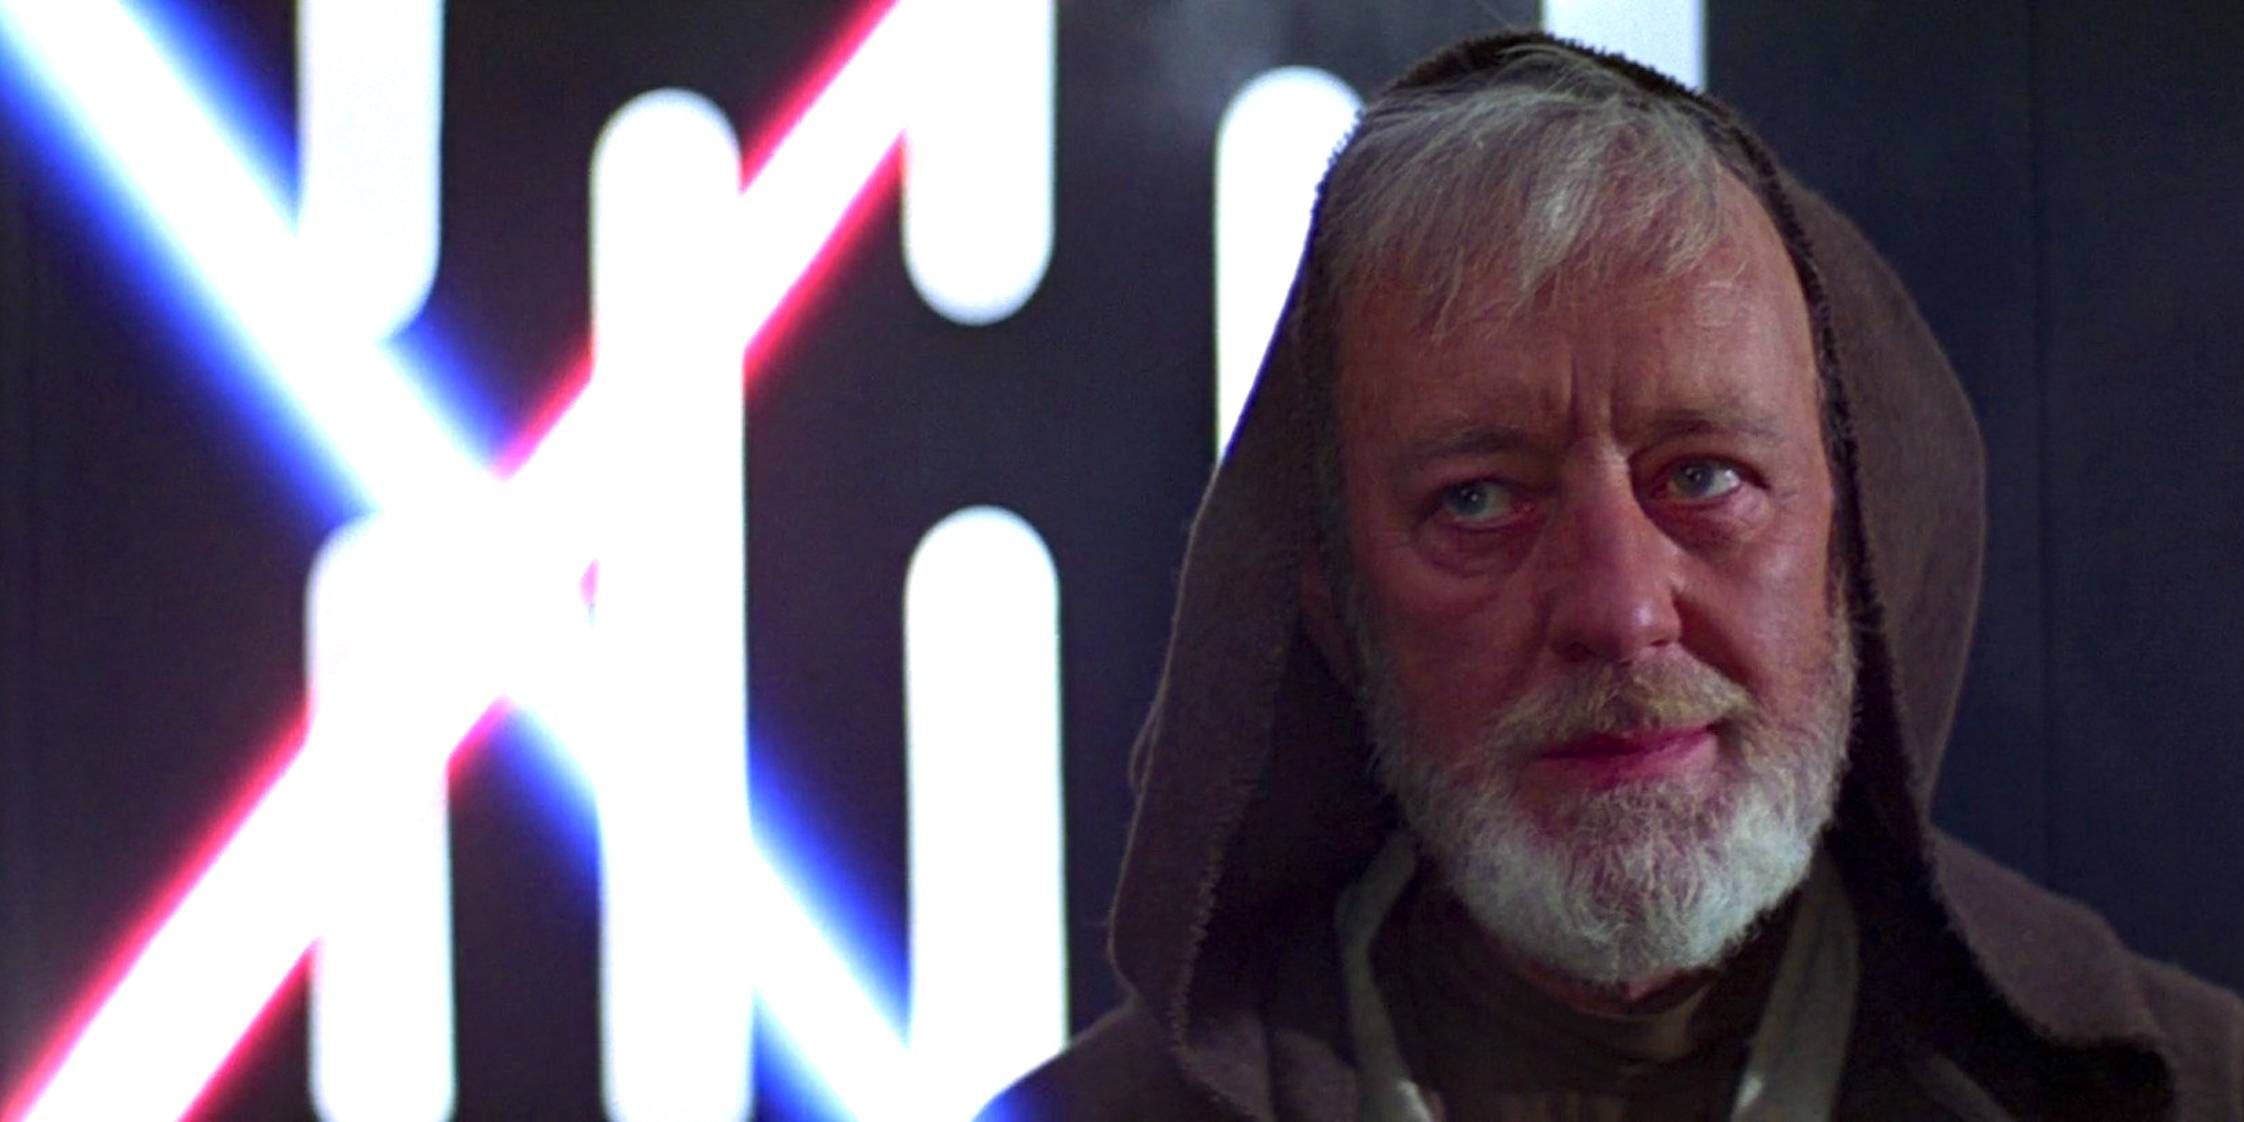 Sir Alec Guinness as Obi-Wan Kenobi smiling just before his death in Star Wars: Episode IV: A New Hope